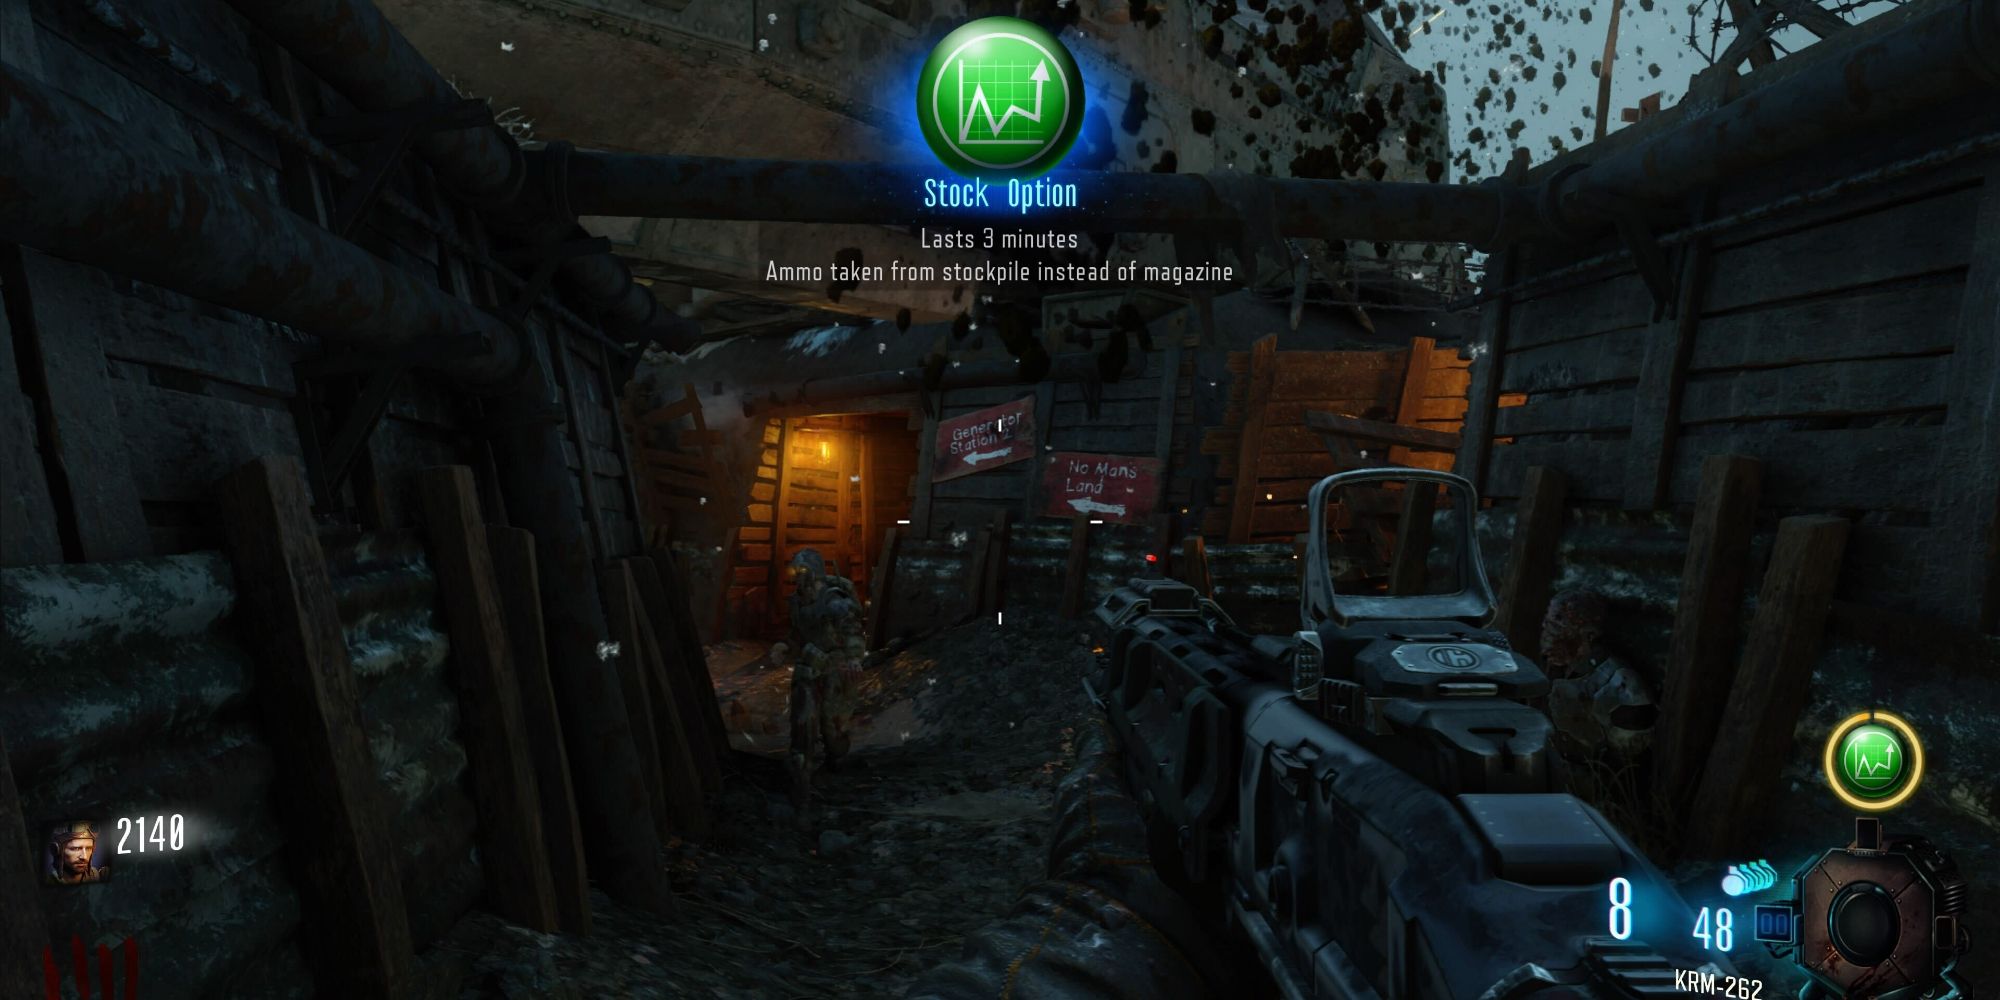 Gameplay from Call Of Duty: Black Ops 3 Zombie mode, showing the player has used a Stock Option Gobblegum